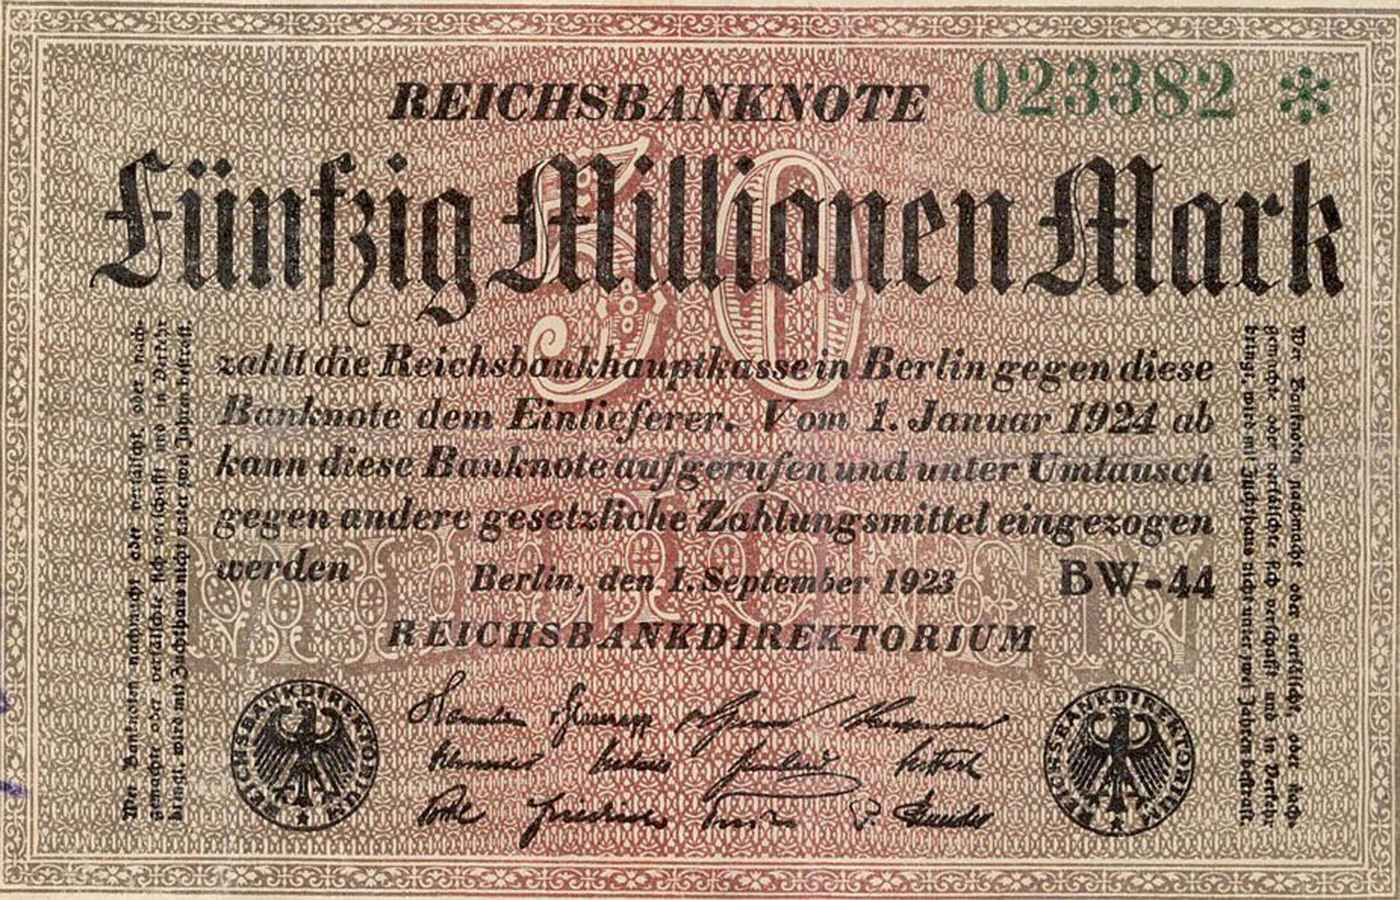 Fifty million Reichsmark banknote during Weimar Germany's hyperinflation, 1923.